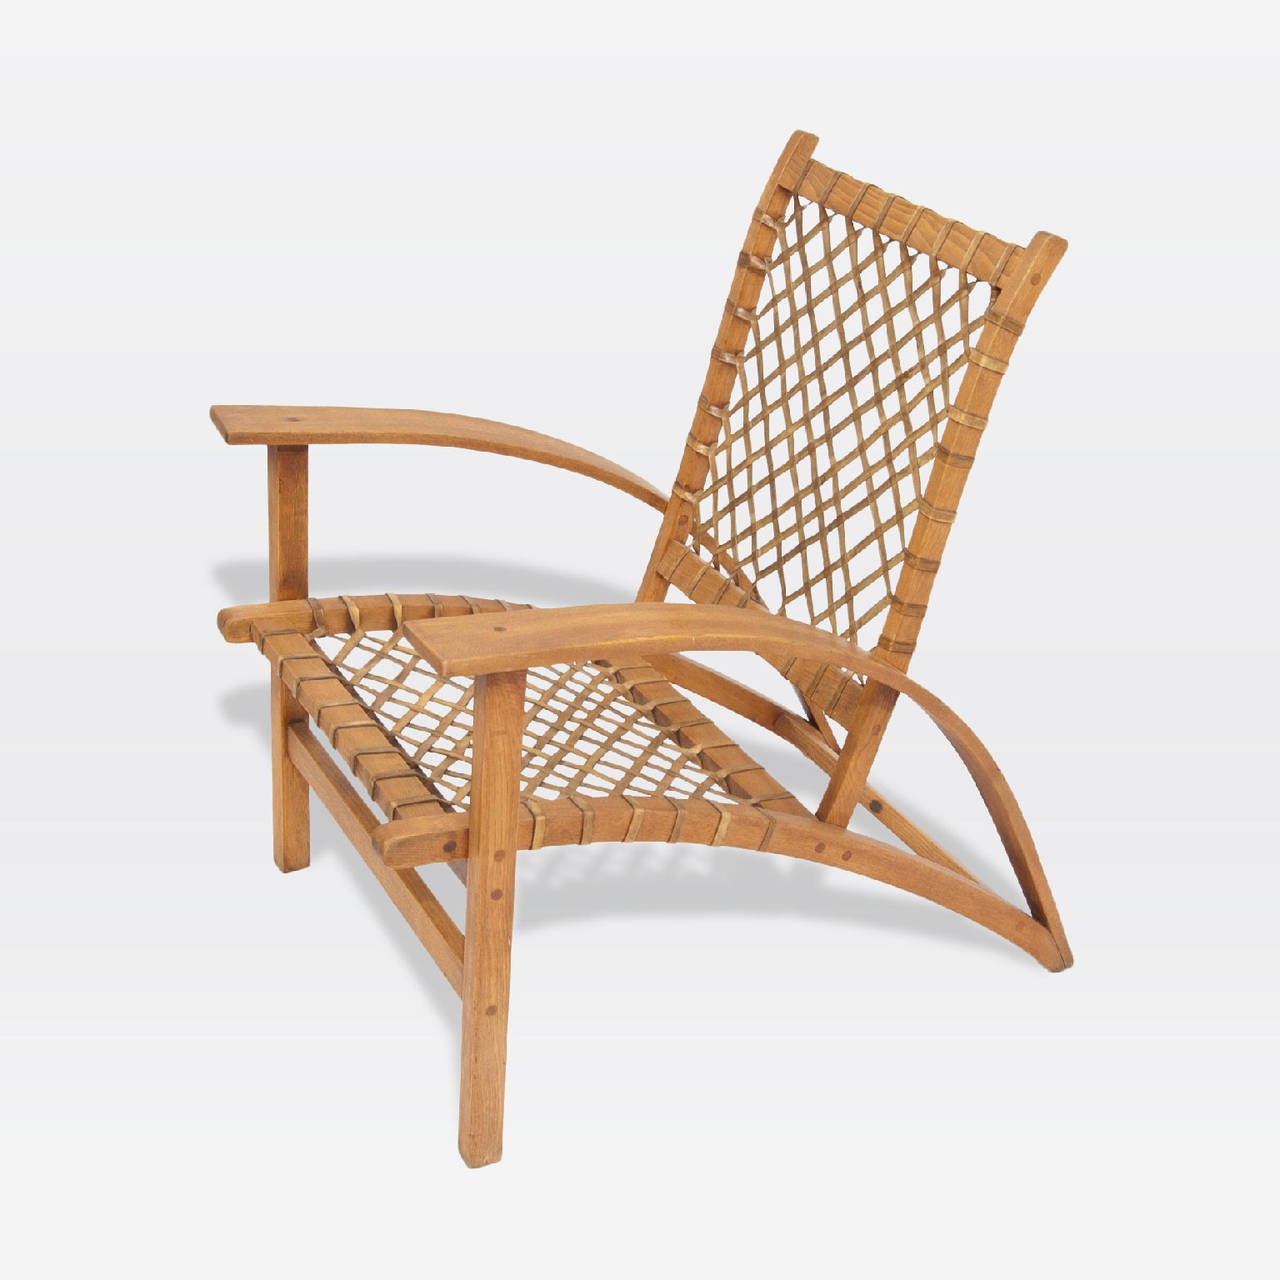 Armchair by Vermont Tubbs with wood frame, rawhide seat and back. Original label underneath.